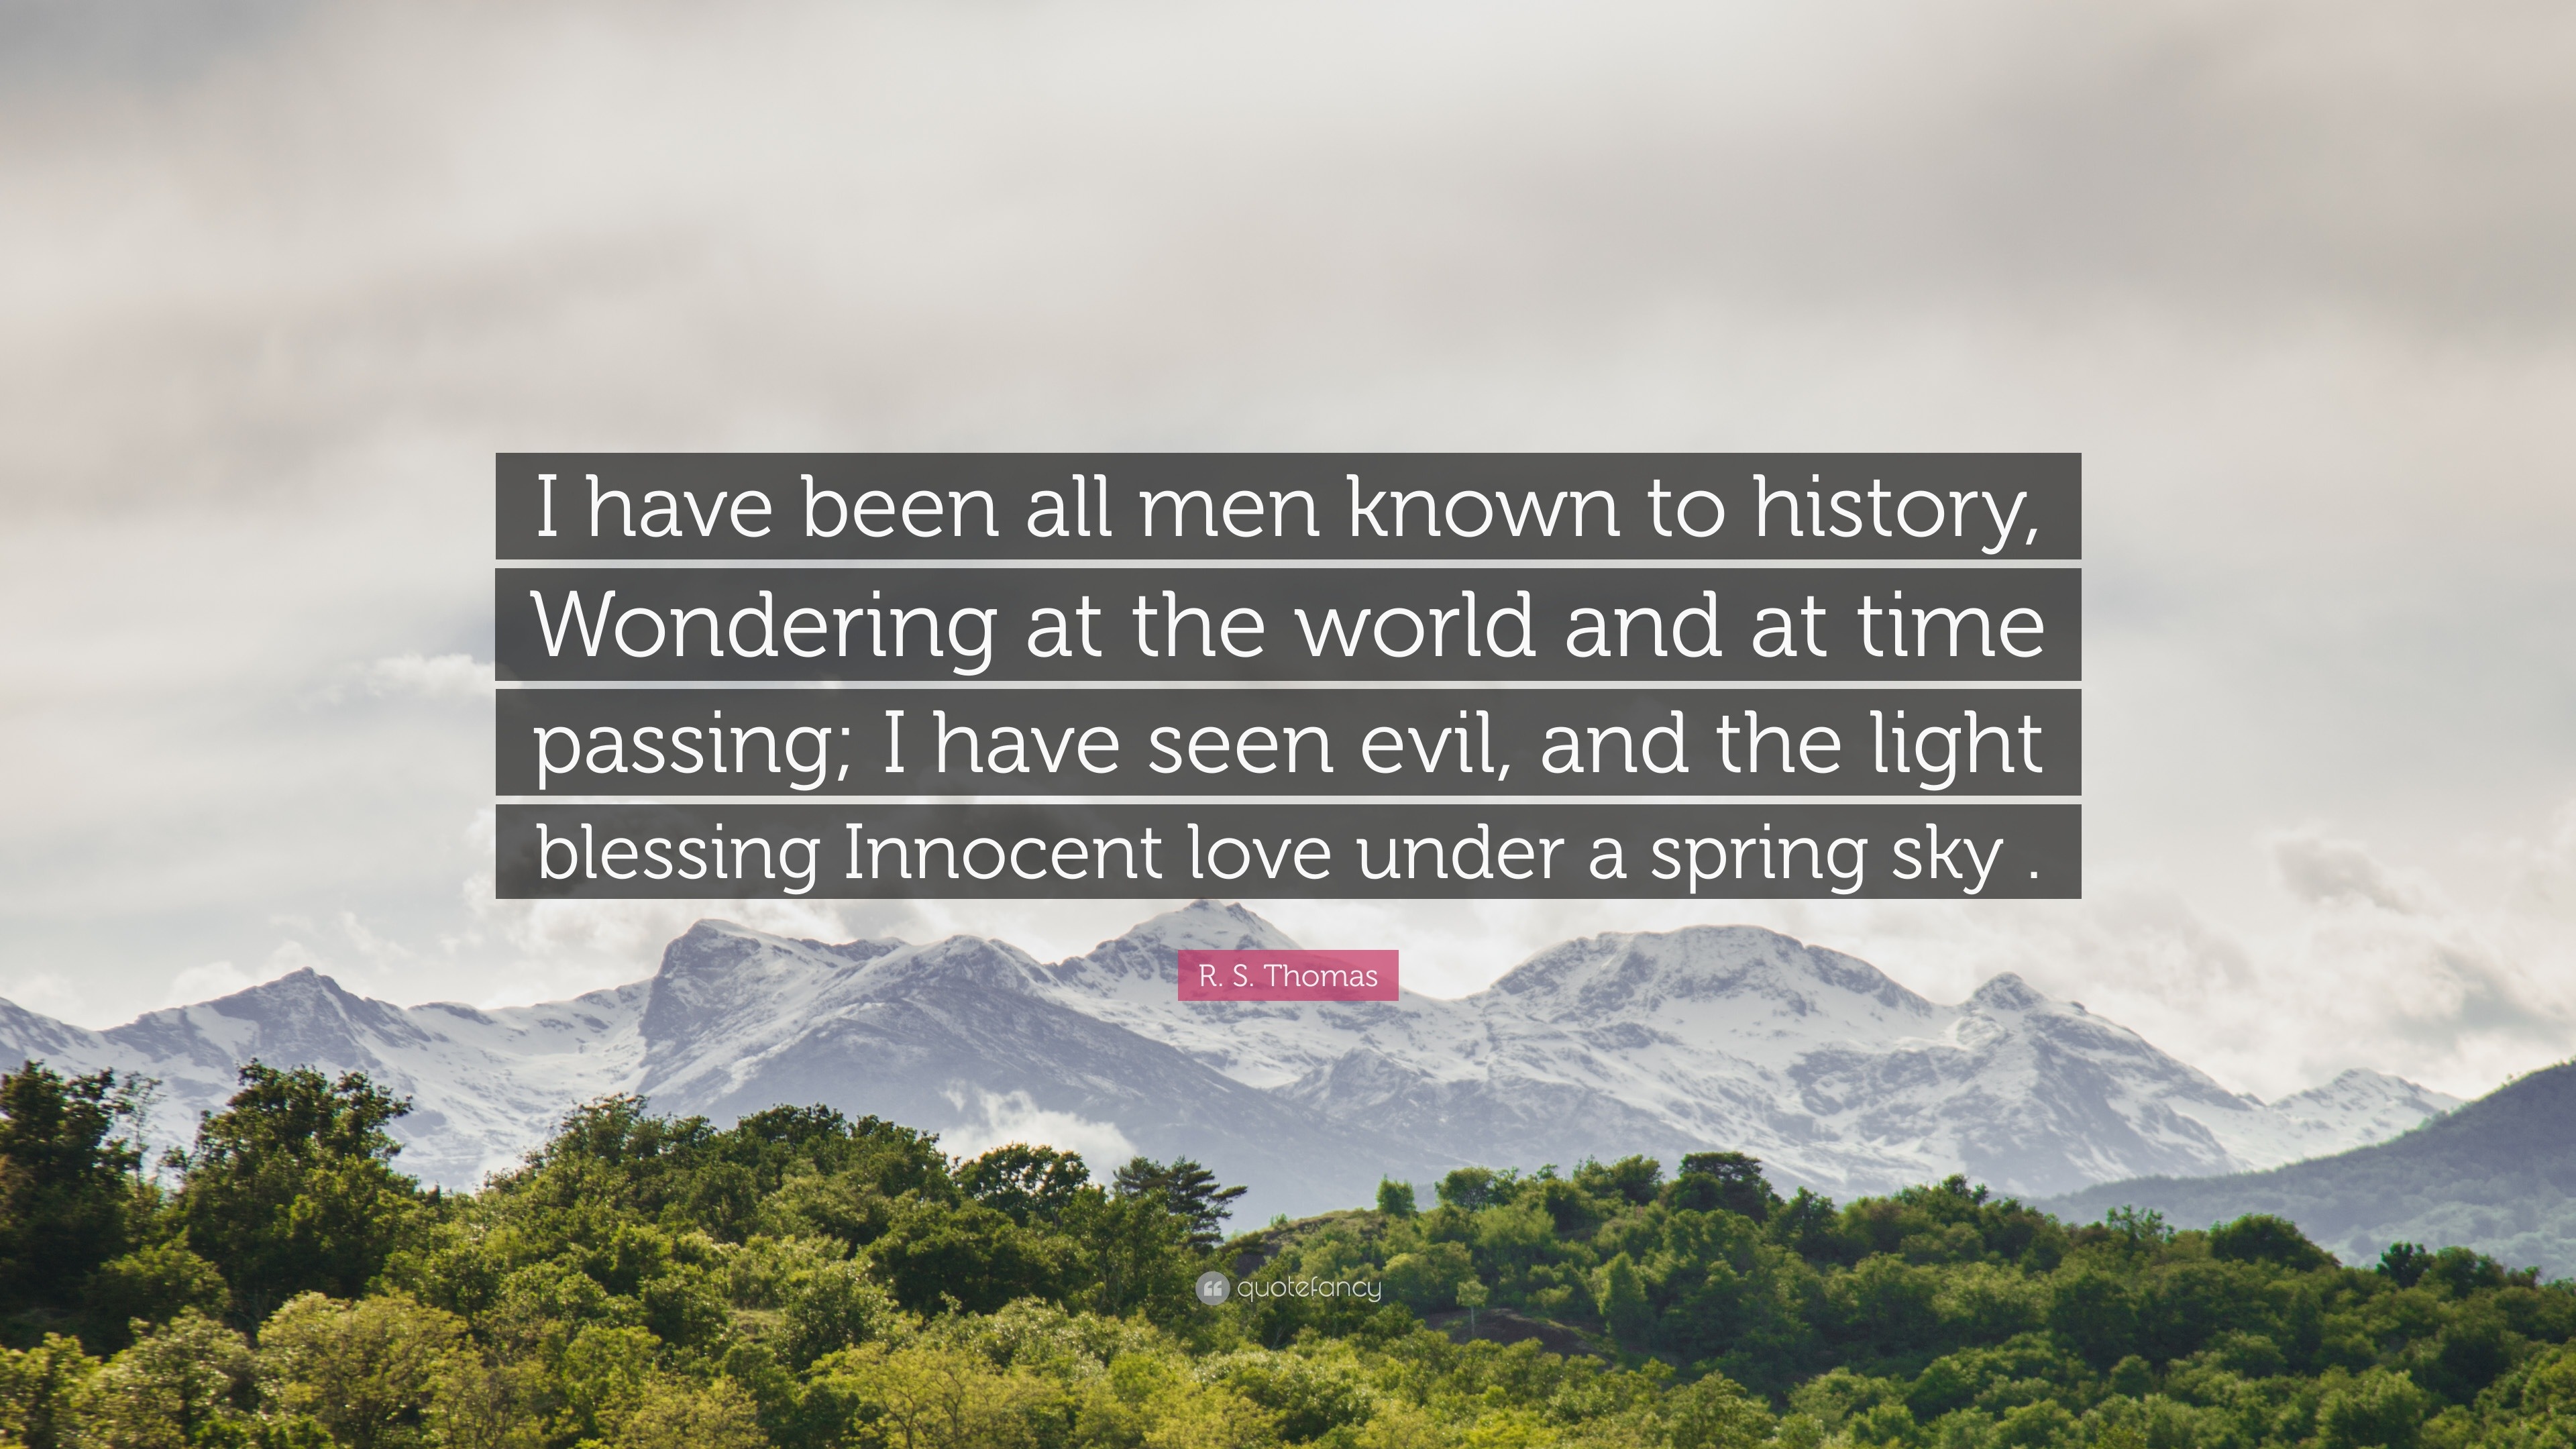 R S Thomas Quote “I have been all men known to history Wondering at